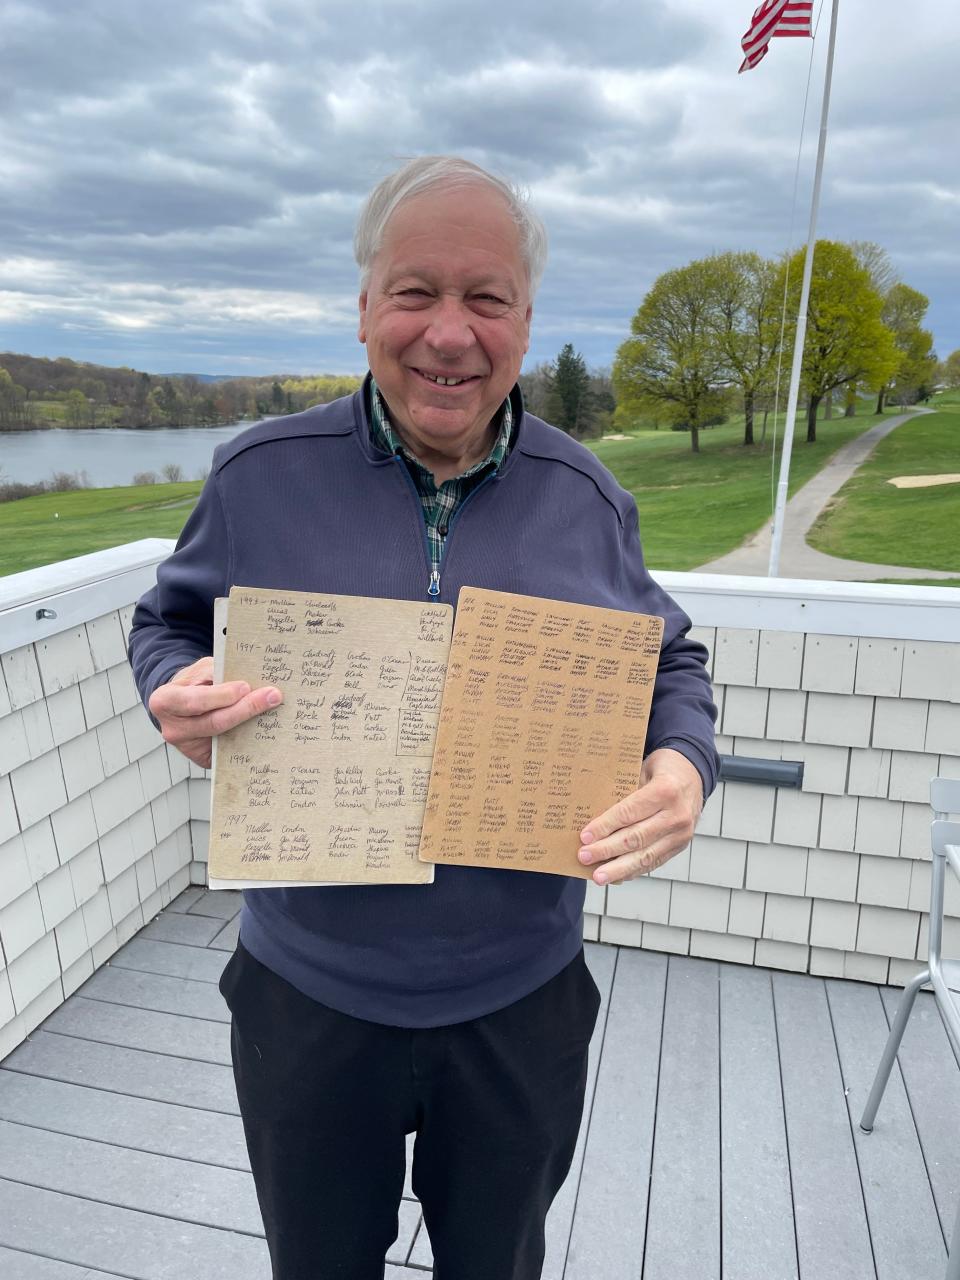 On Green Hill Municipal Golf Course’s deck, Tom Mullins holds the lists of names, courses and years he’s organized southern golf trips since 1993.